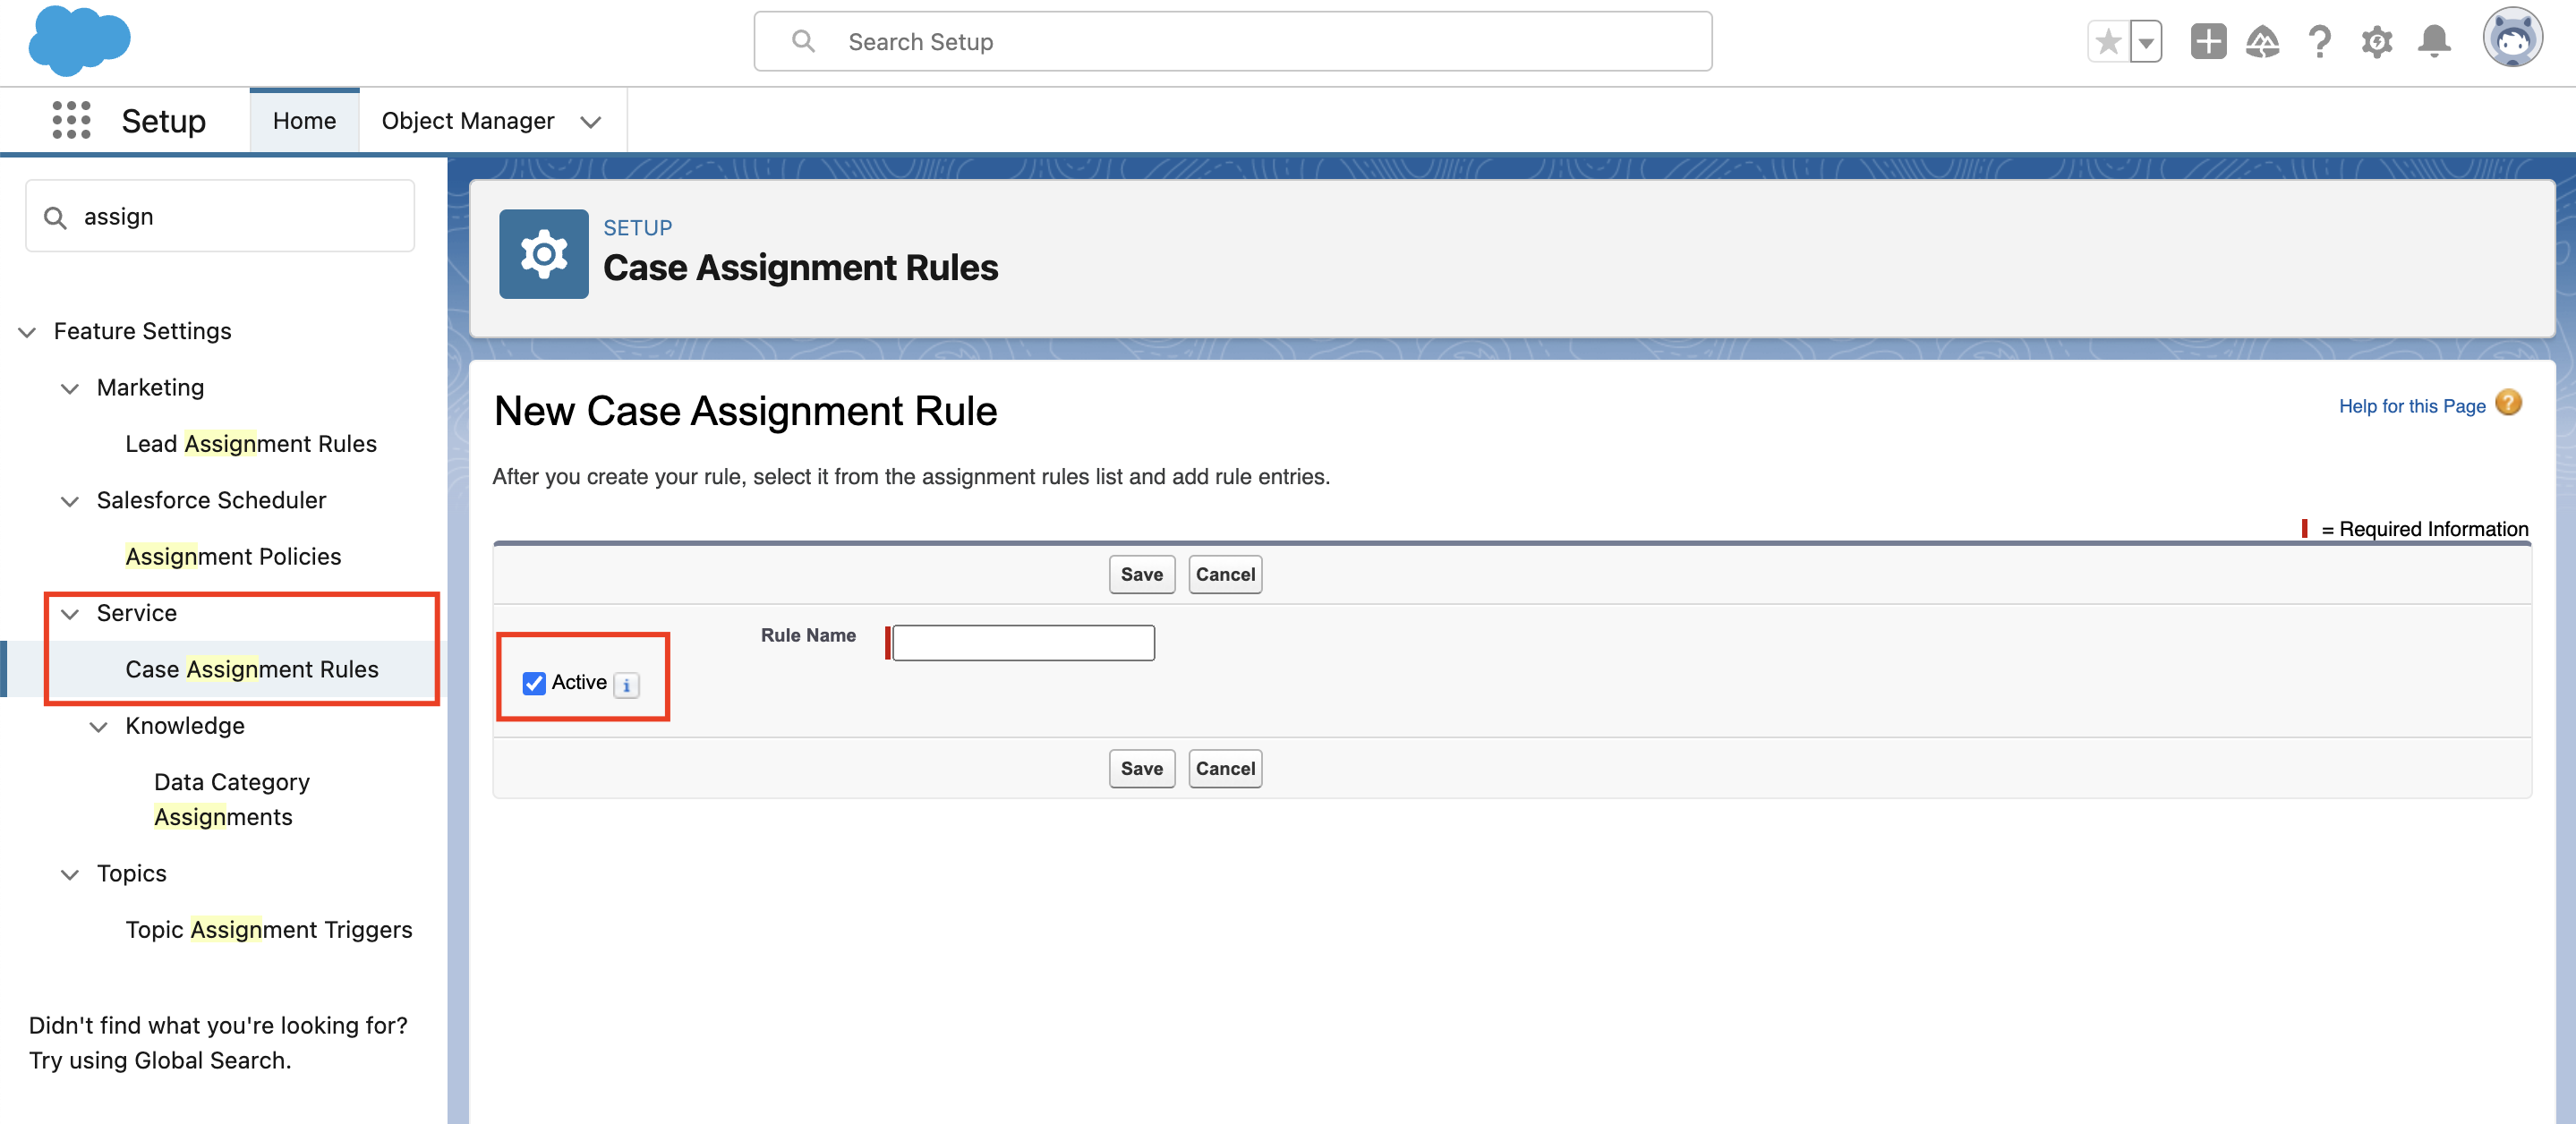 Case Assignment Rule creation